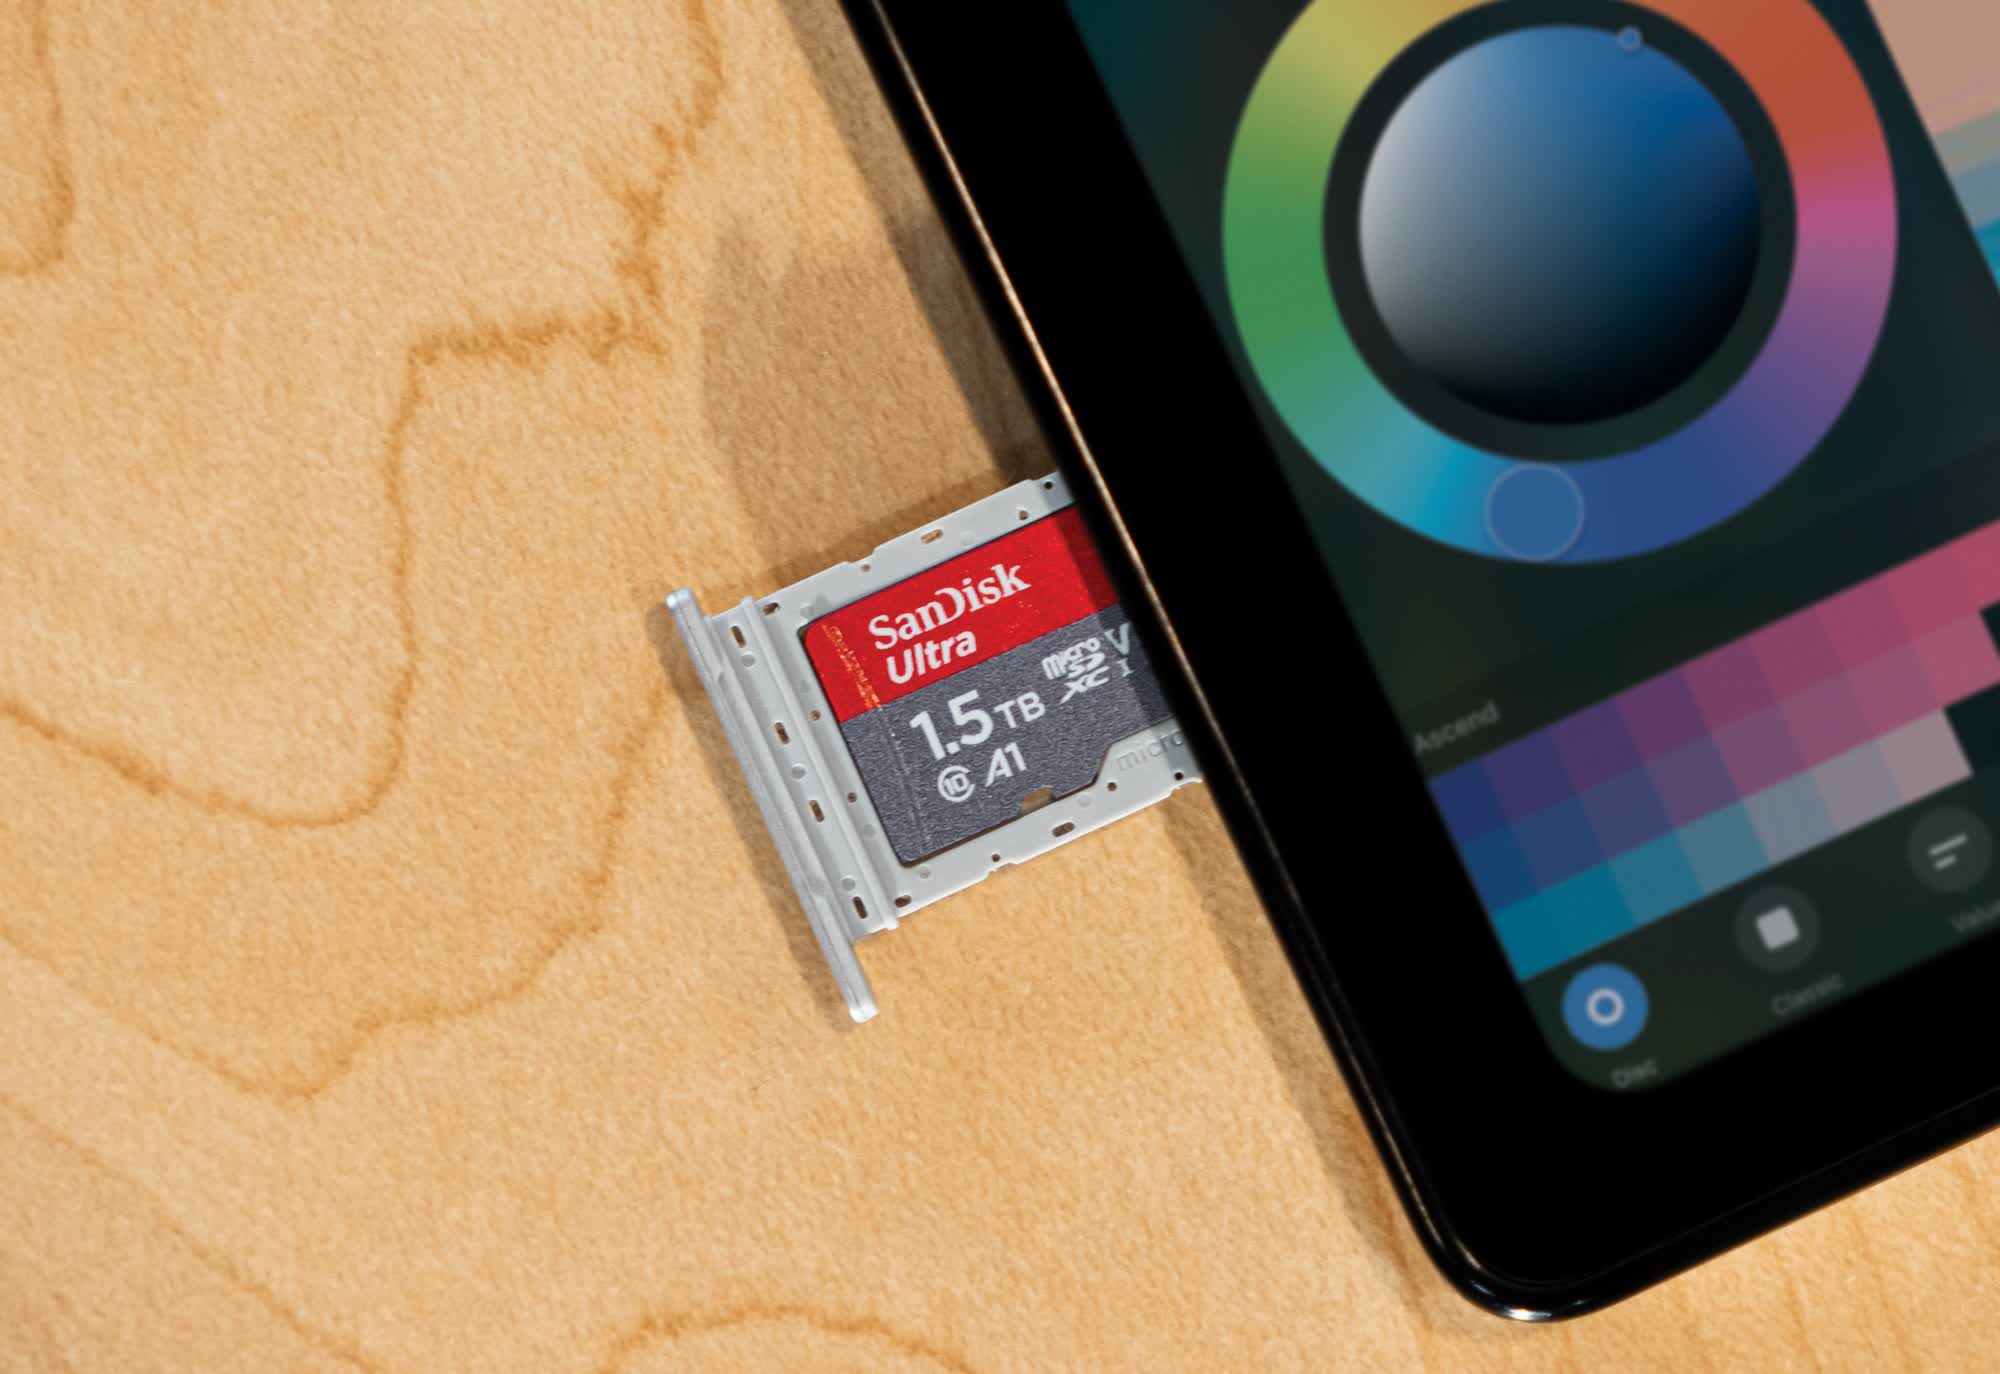 SanDisk announces world's fastest 1.5 TB microSD card, and several other storage products